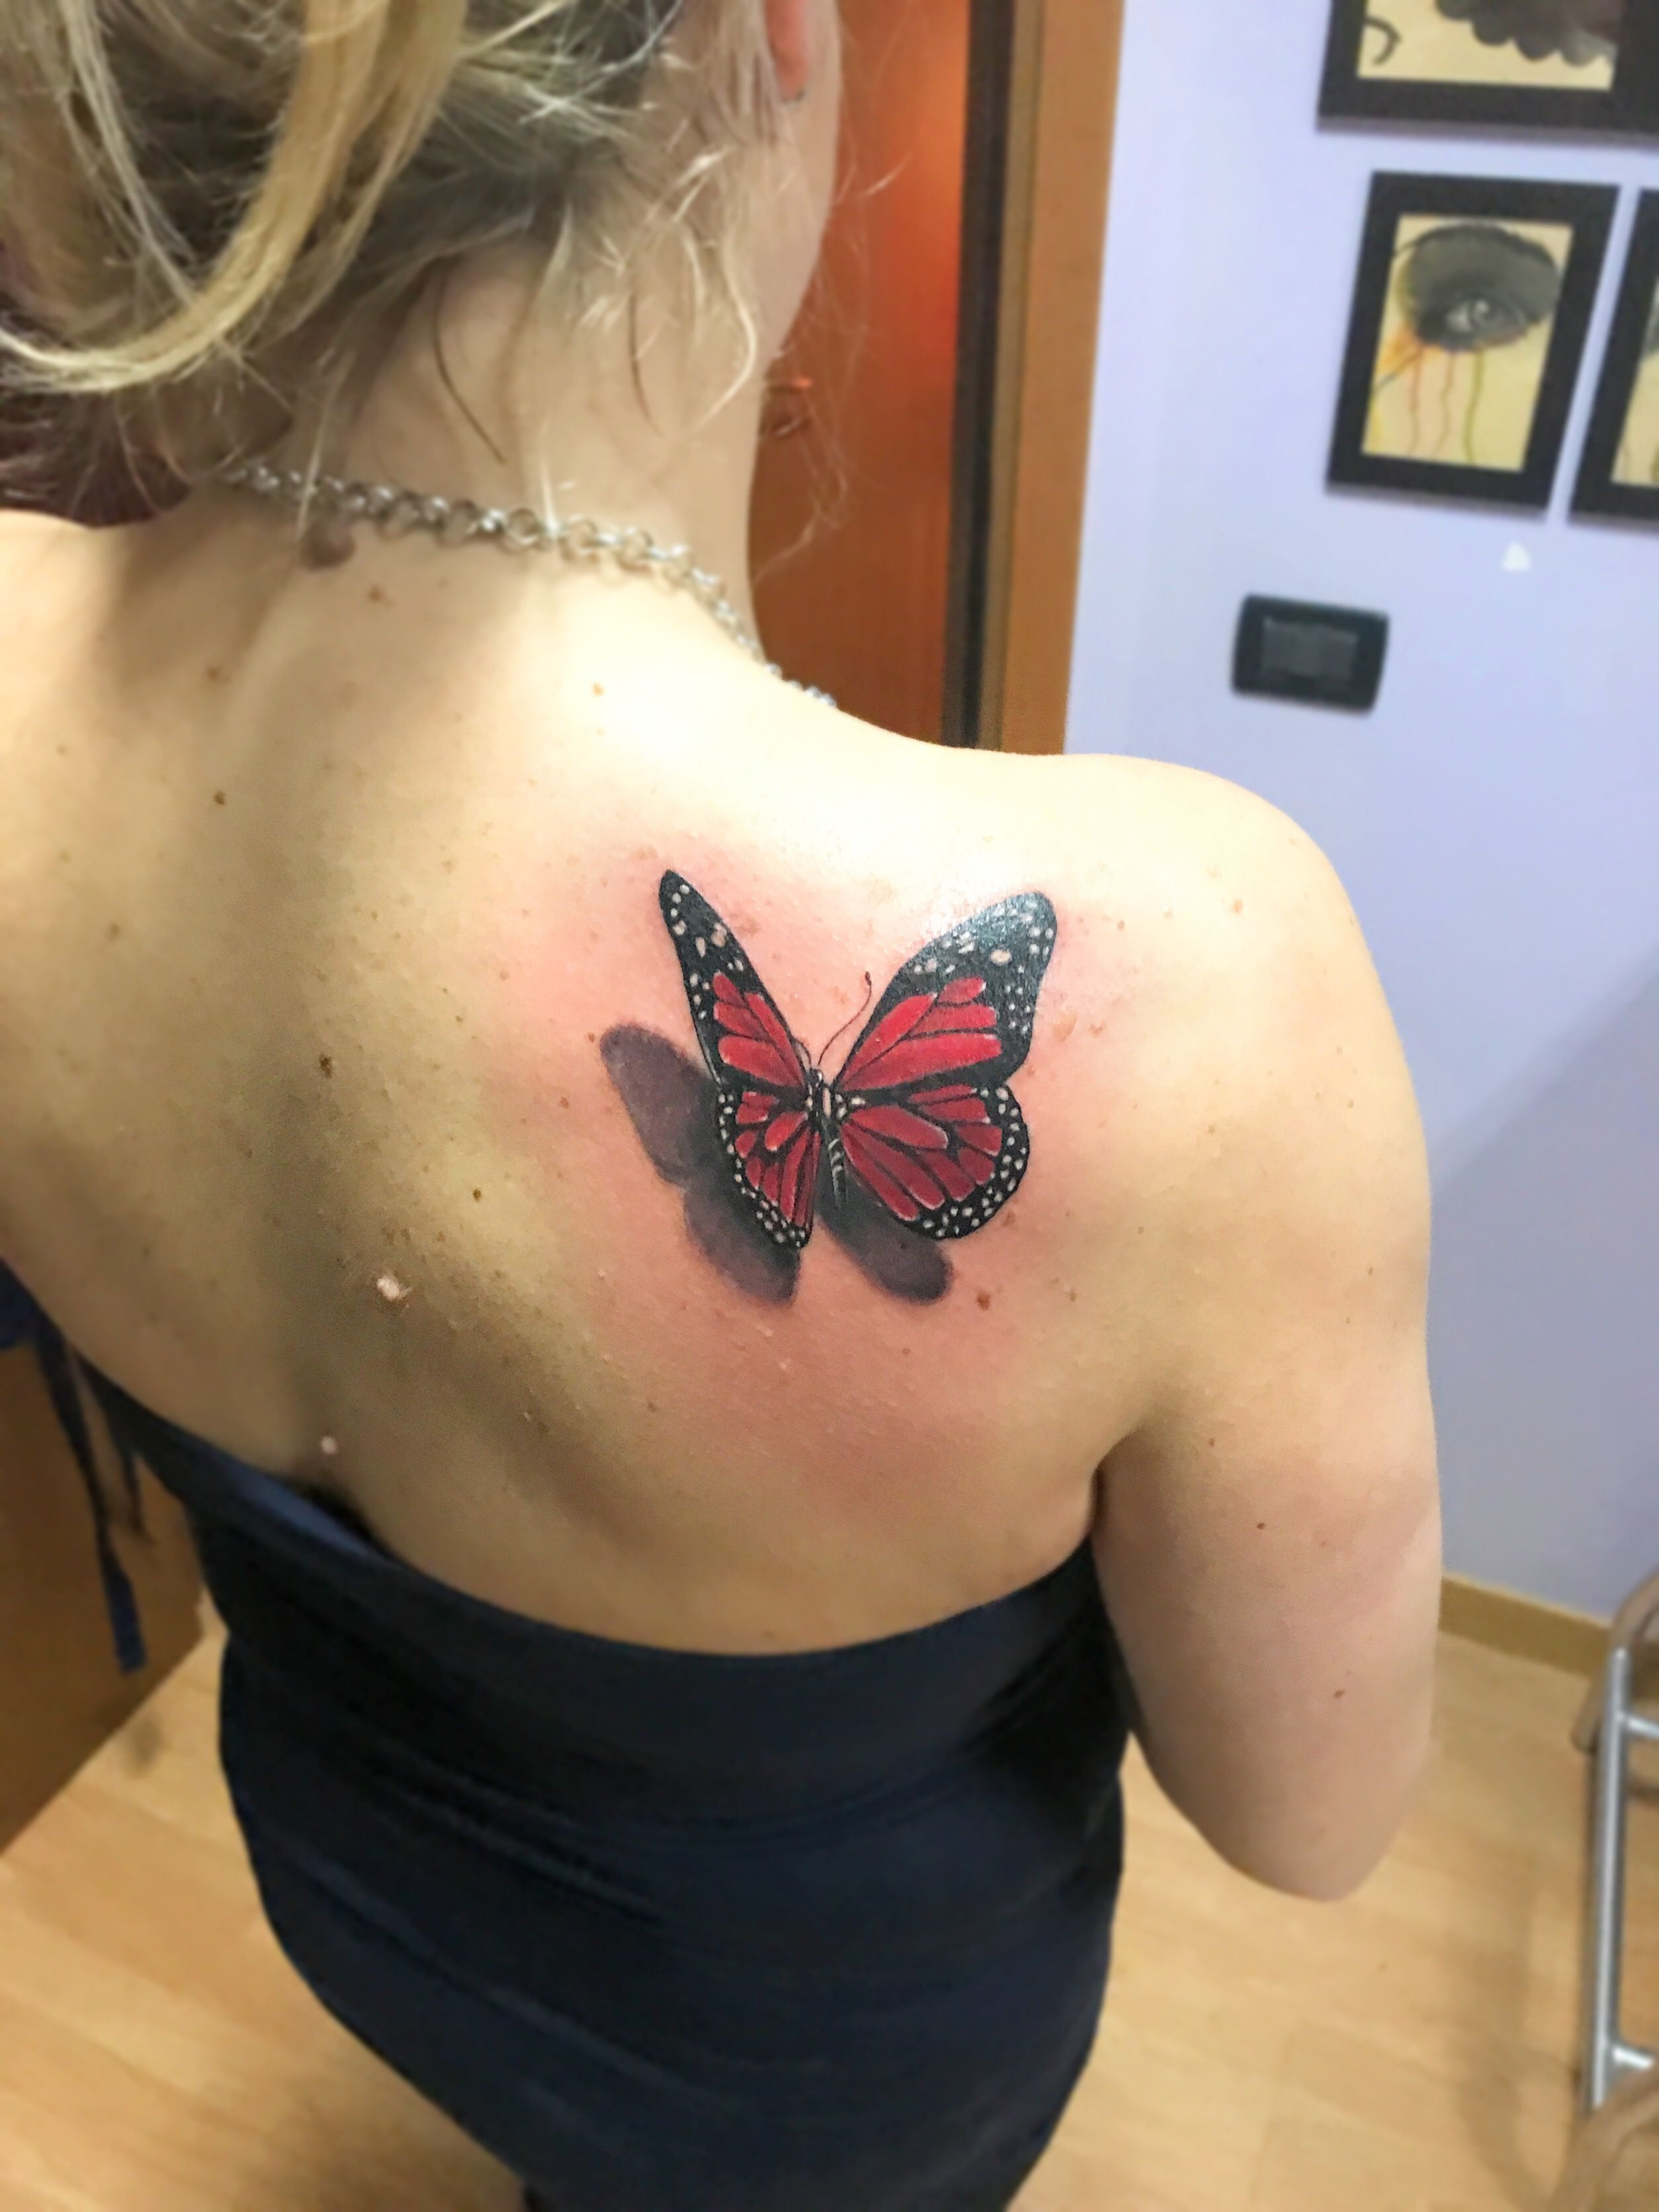 Mta Mtatattoo Butterfly3d Ink Tattoo Red Butterfly Girls Hot intended for m...